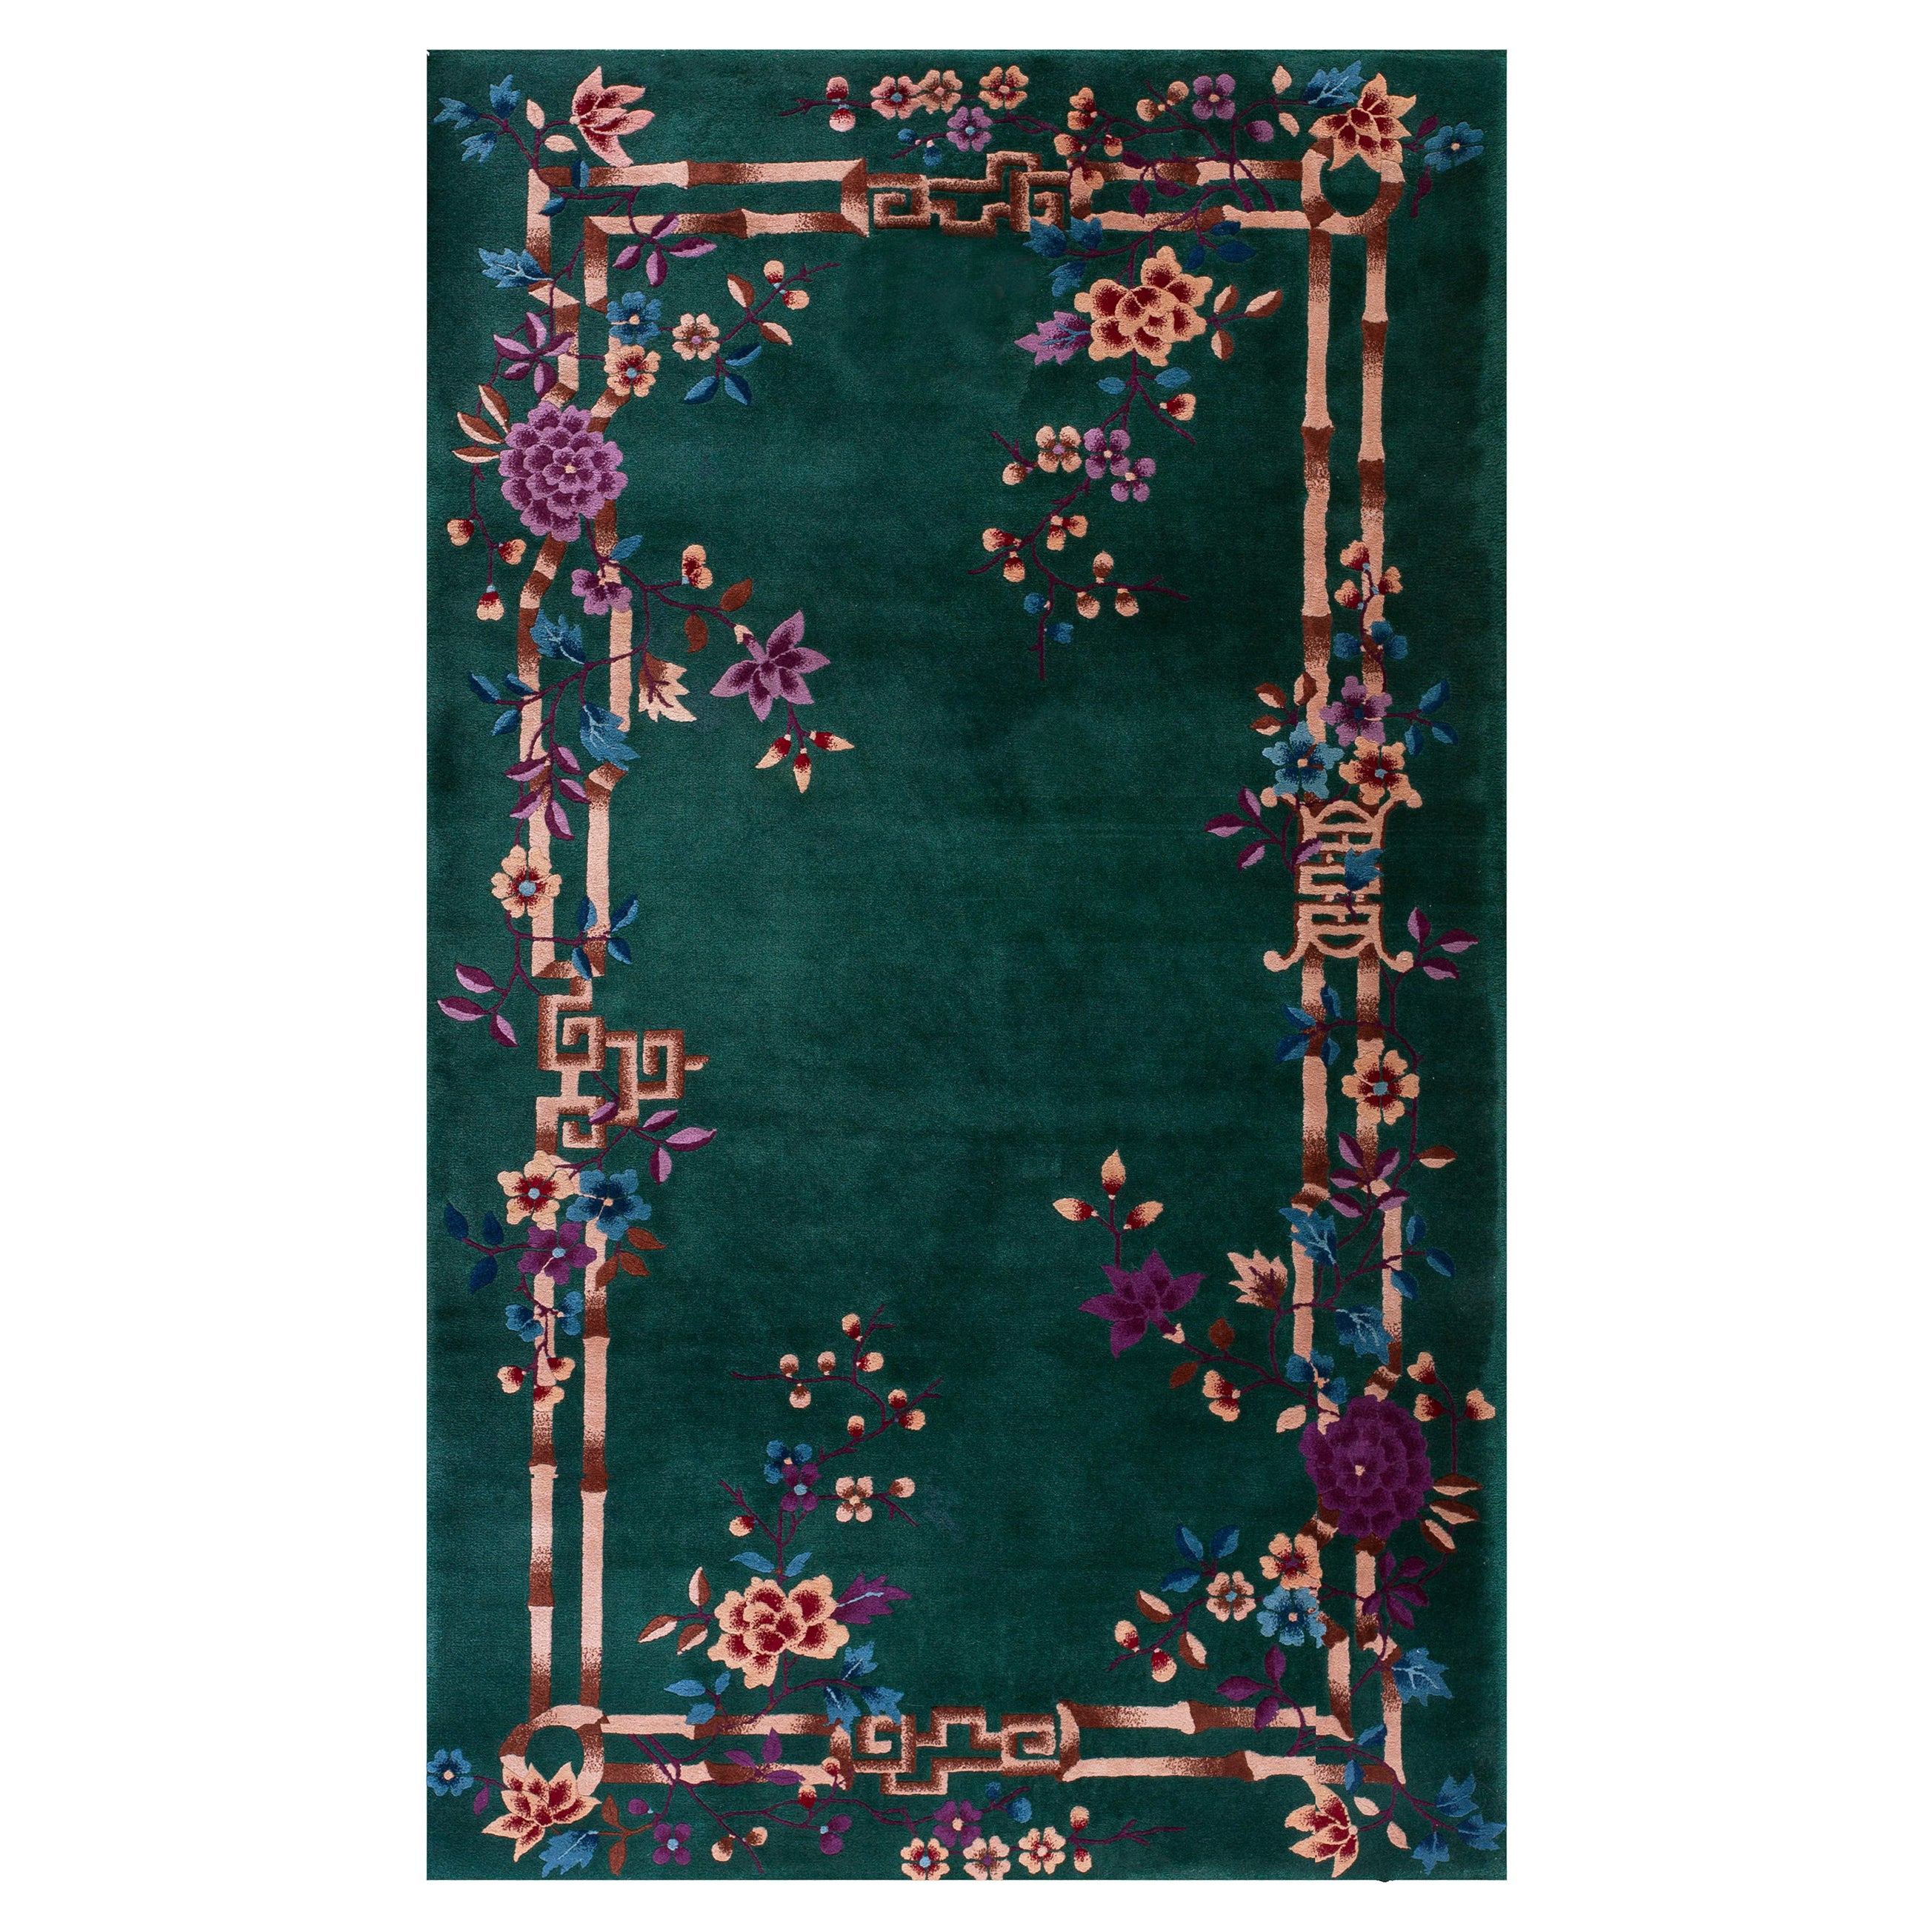 1920s Chinese Art Deco Rug ( 4'2" x 7' - 127 x 213 ) For Sale